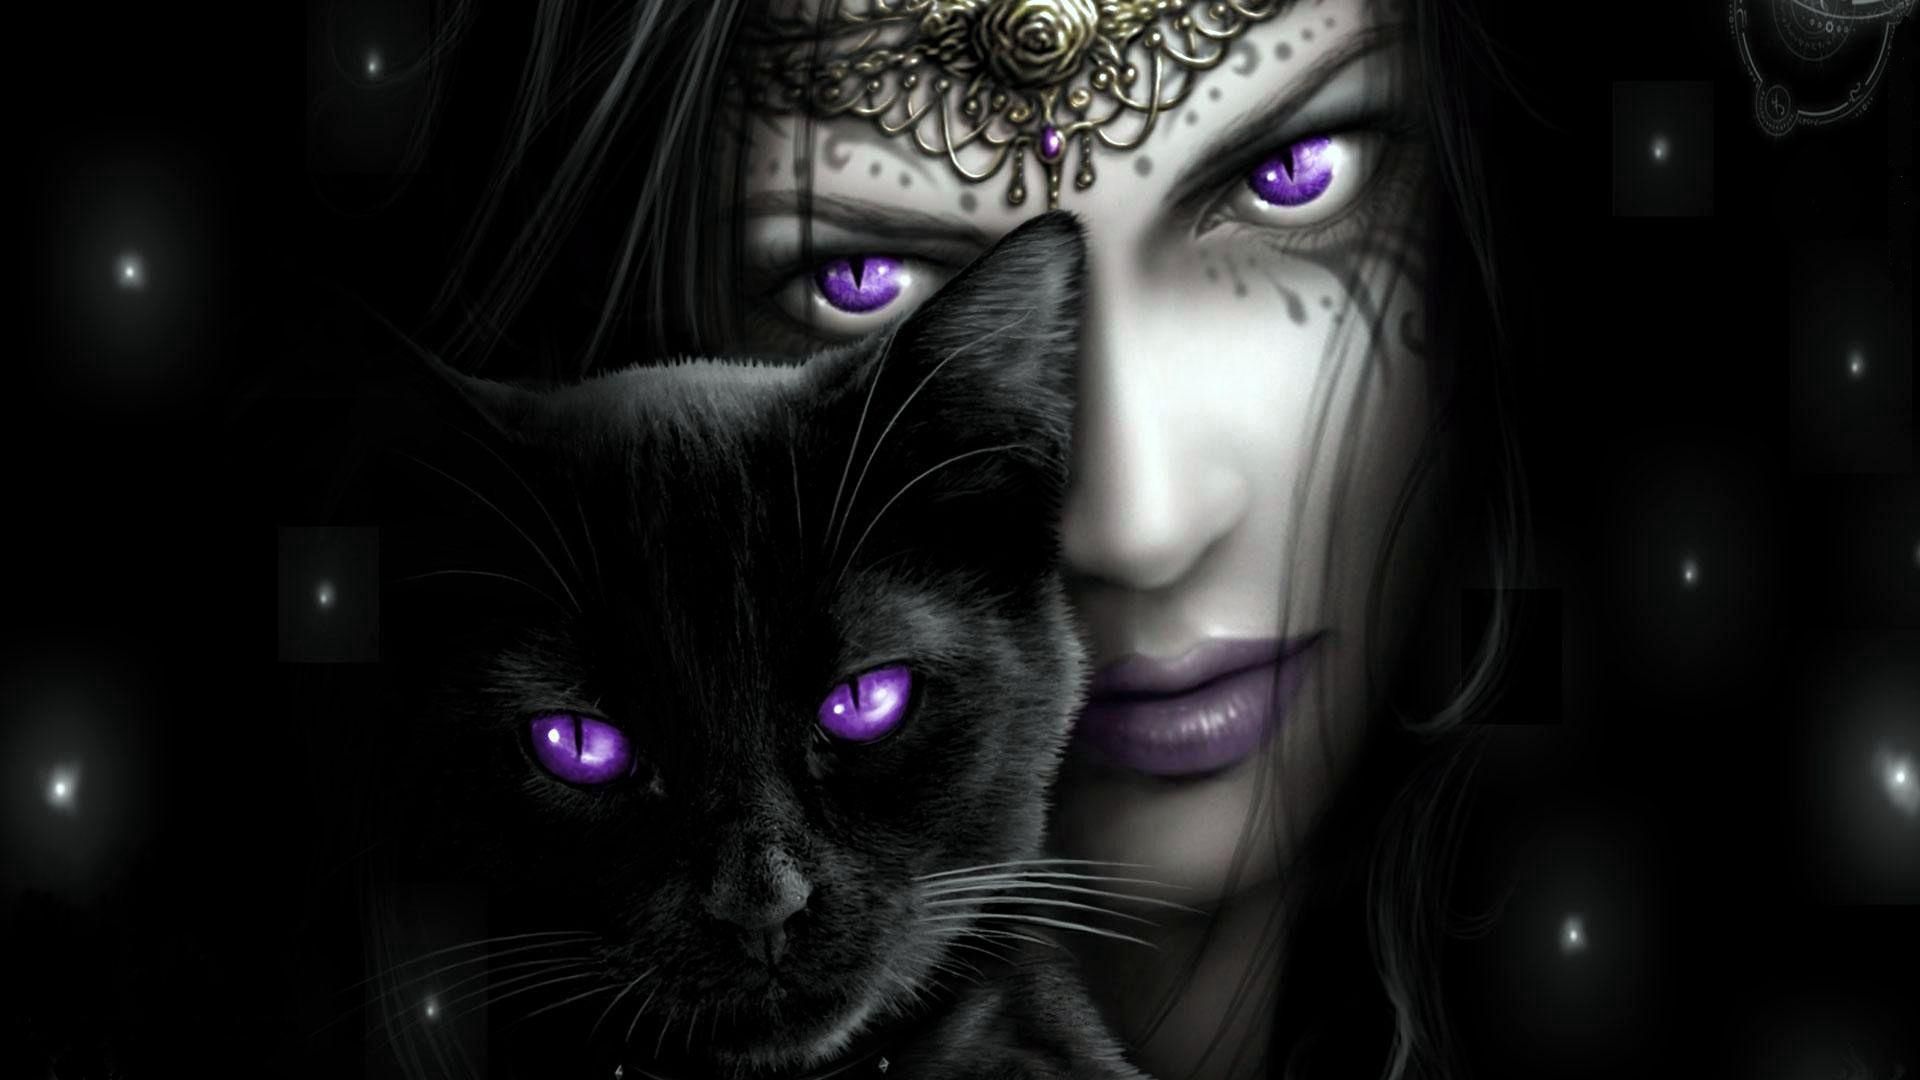 146481 download wallpaper fantasy, lilac, cat, eyes, girl, face screensavers and pictures for free